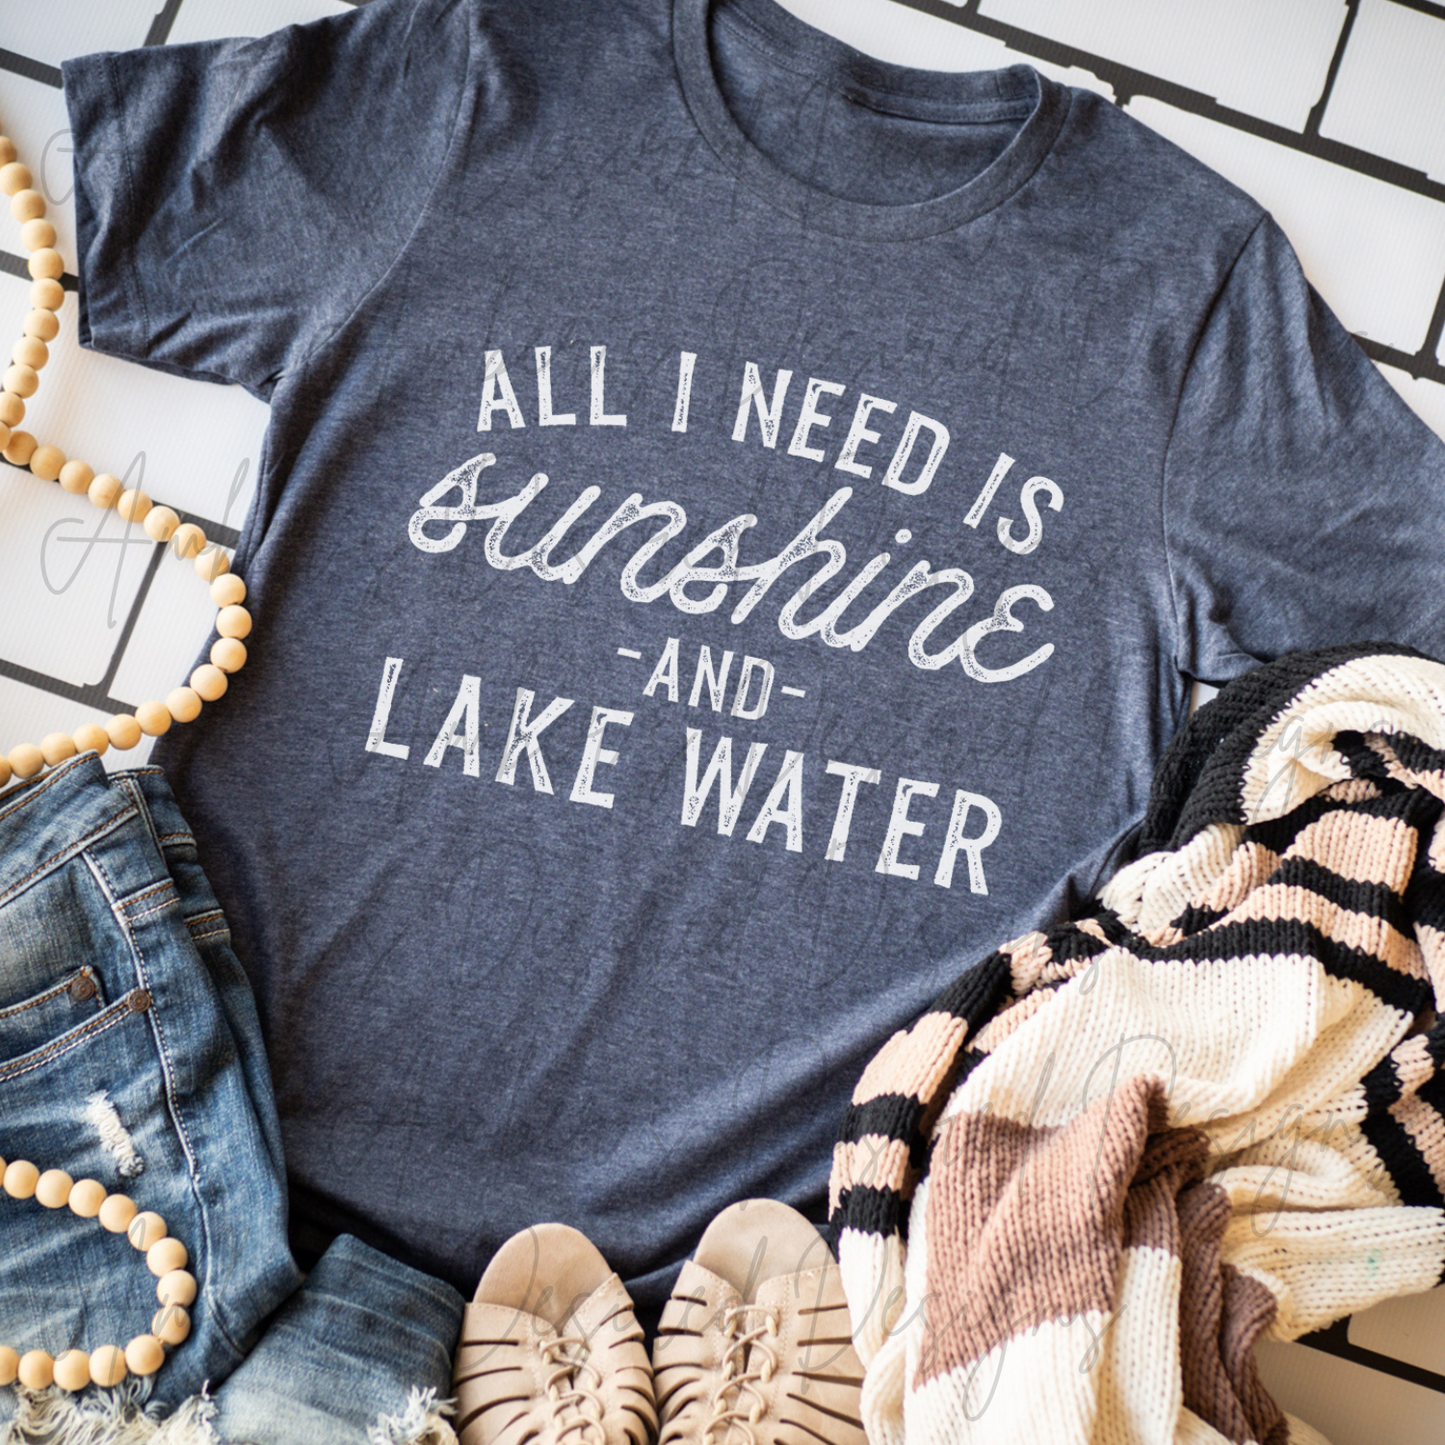 The Beach, River, Lake Is My Happy Place - short sleeve T